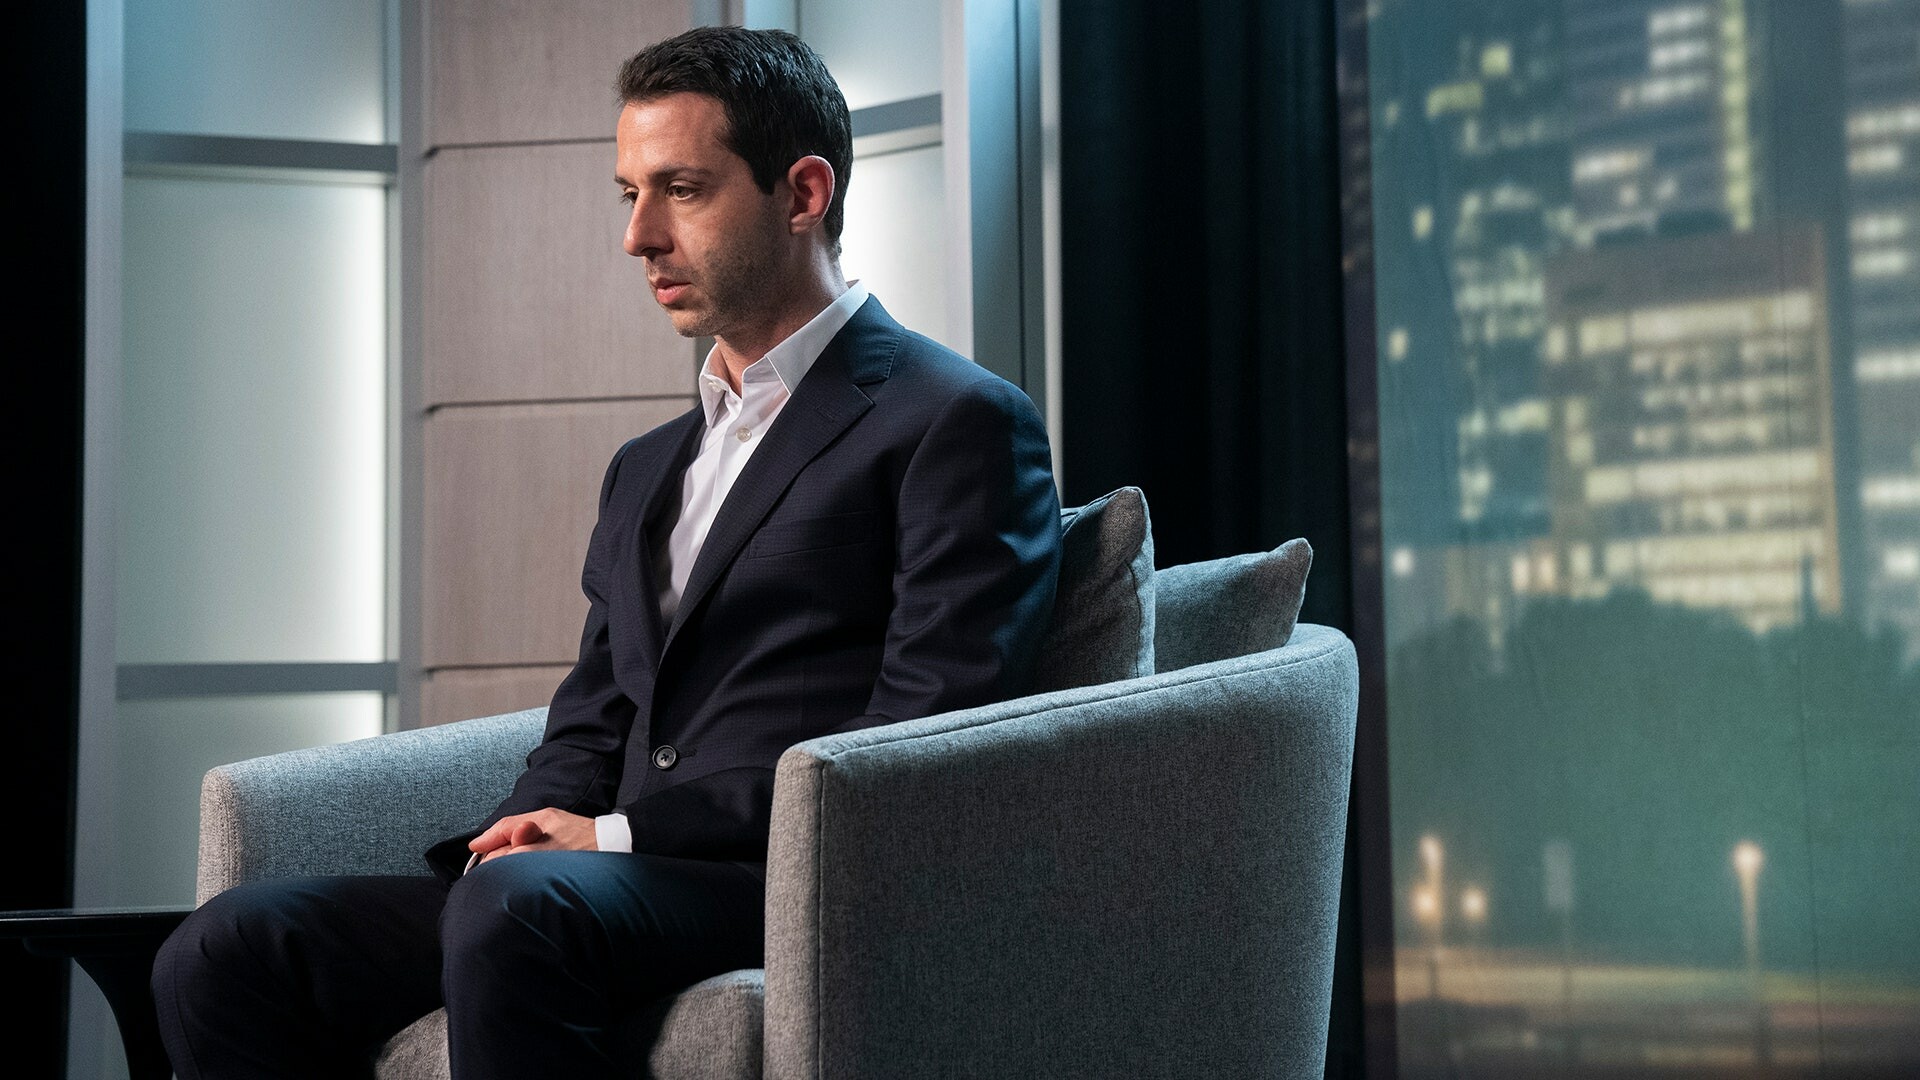 Succession (TV Series): Season 2, Jeremy Strong as Kendall Roy, took legal action against his brother Roman. 1920x1080 Full HD Background.